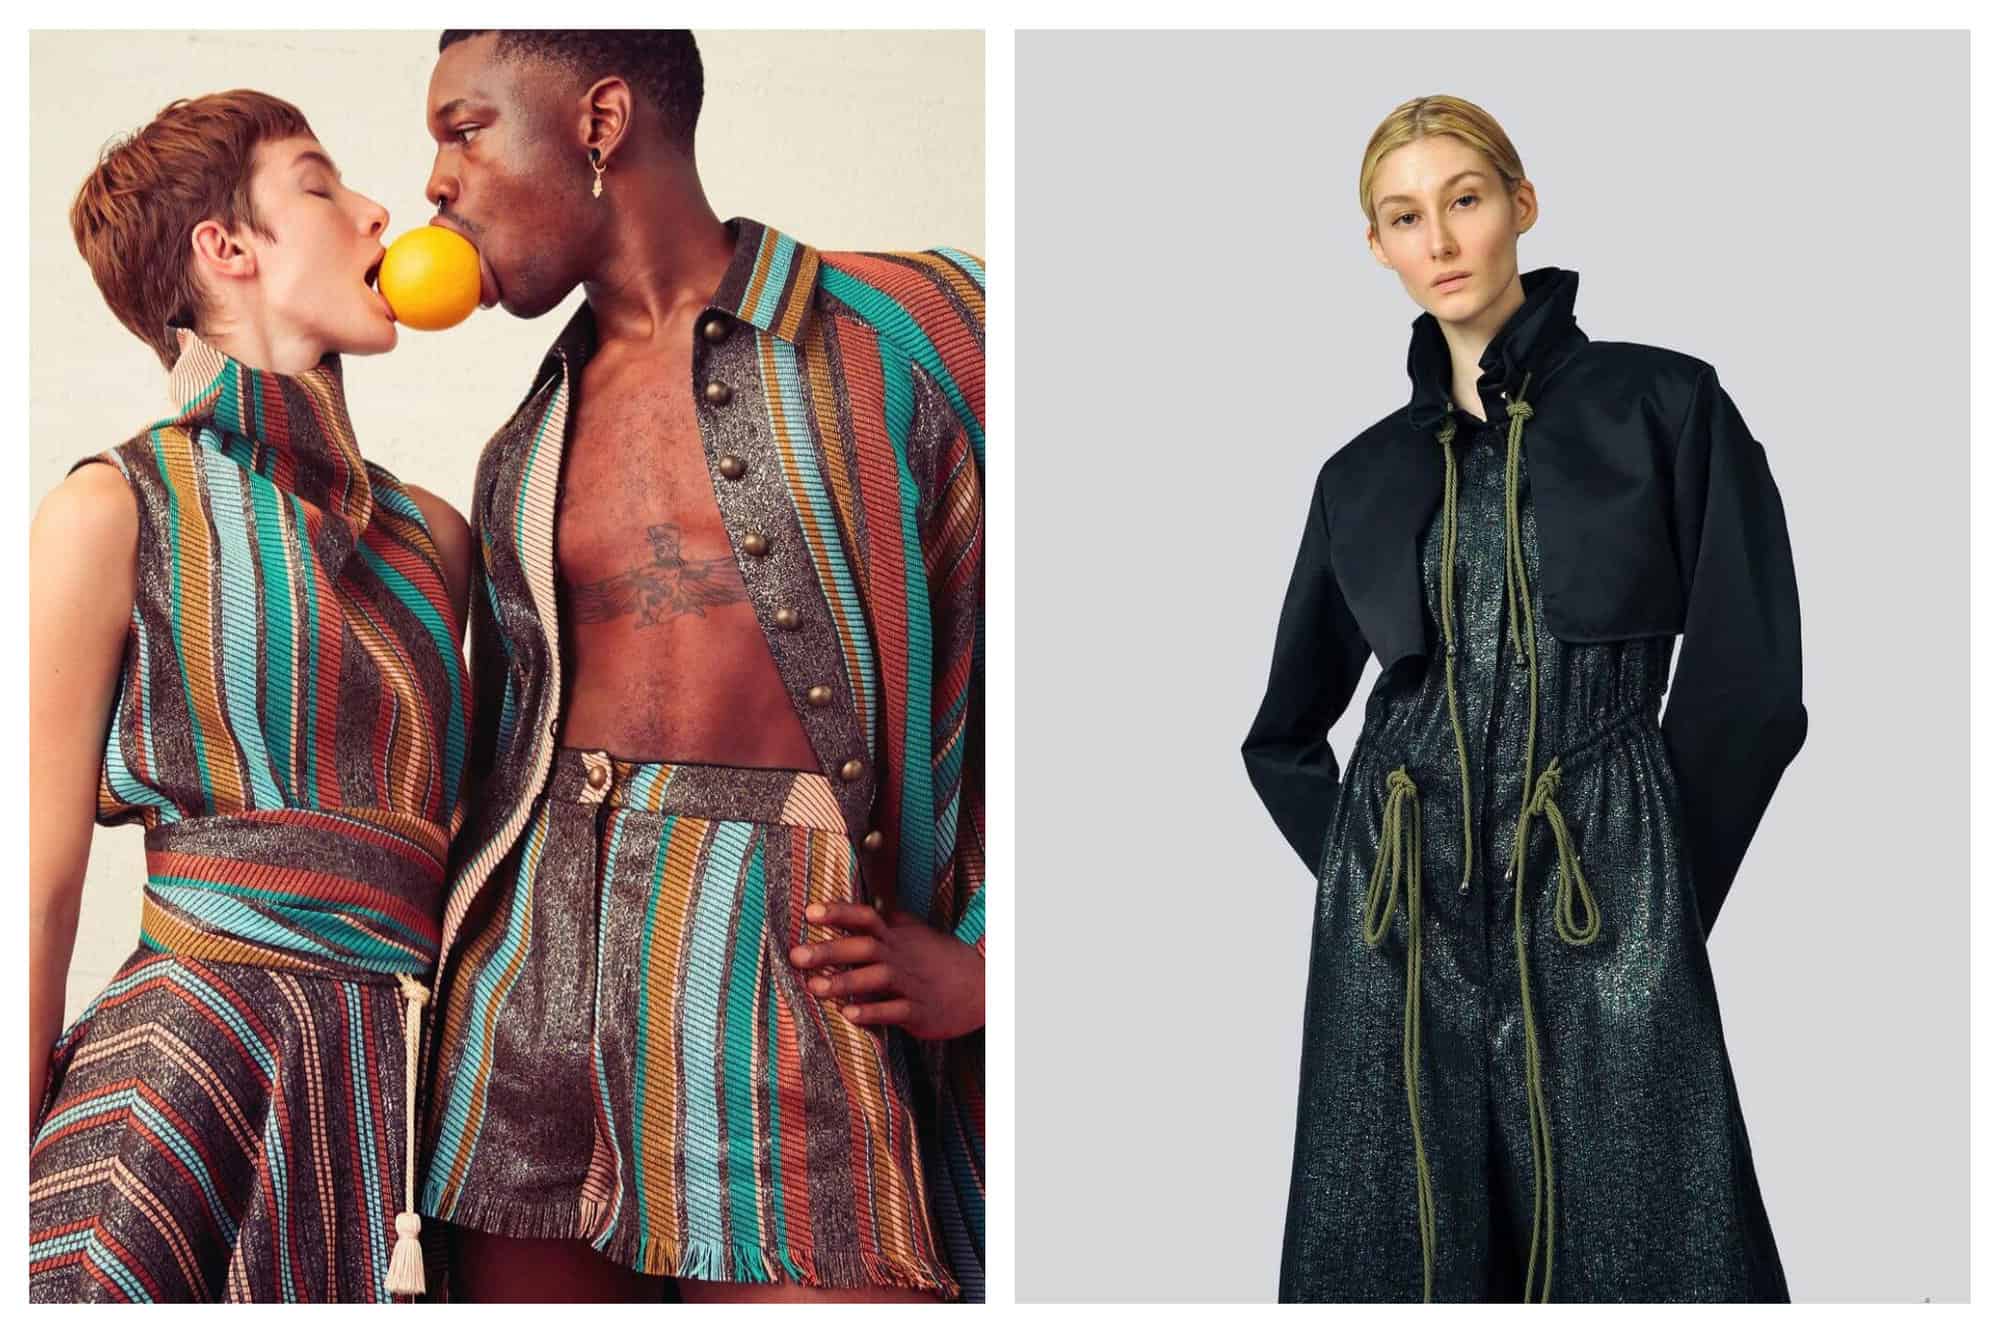 2 pictures from sustainable fashion brand Benjamin Benmoyal. Left: Two models are taking a bite from an orange, supporting it only with both of their mouths. Both are wearing the same fabrics of printed textile in stripes and main hues of brown and blue. A model is wearing a blue metallic dress with green ropes and a navy blue boléro.